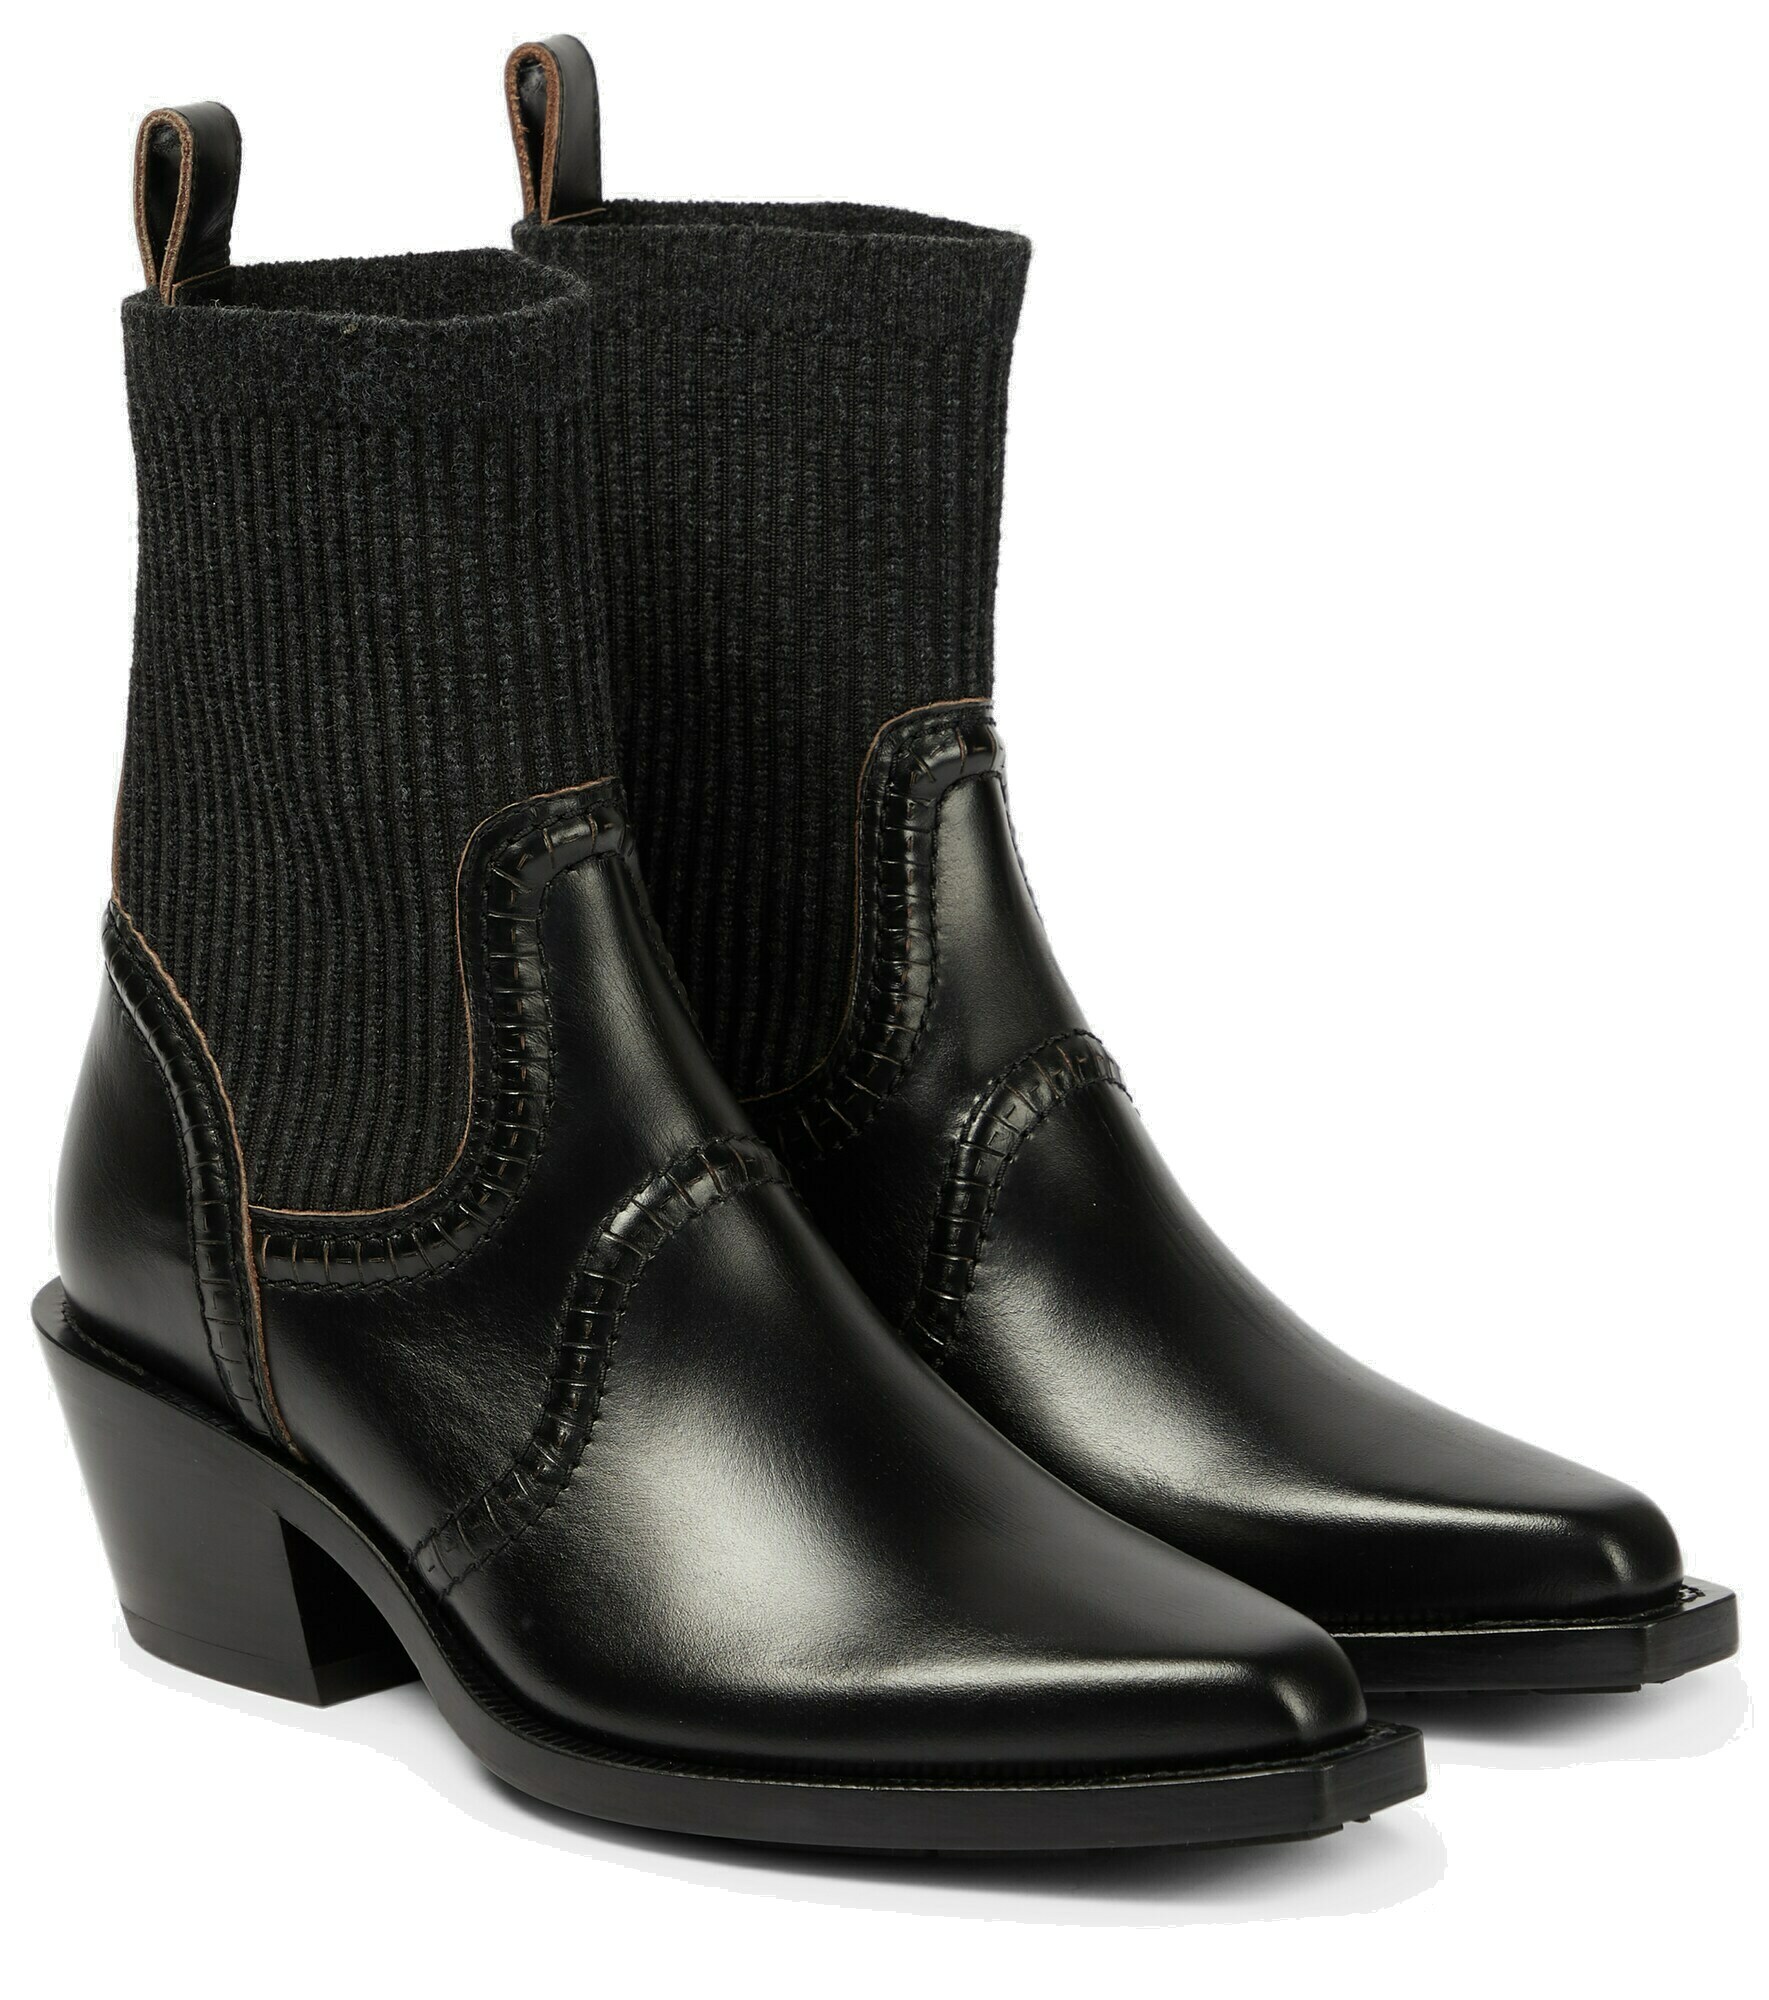 Chloe - Leather ankle boots Chloe